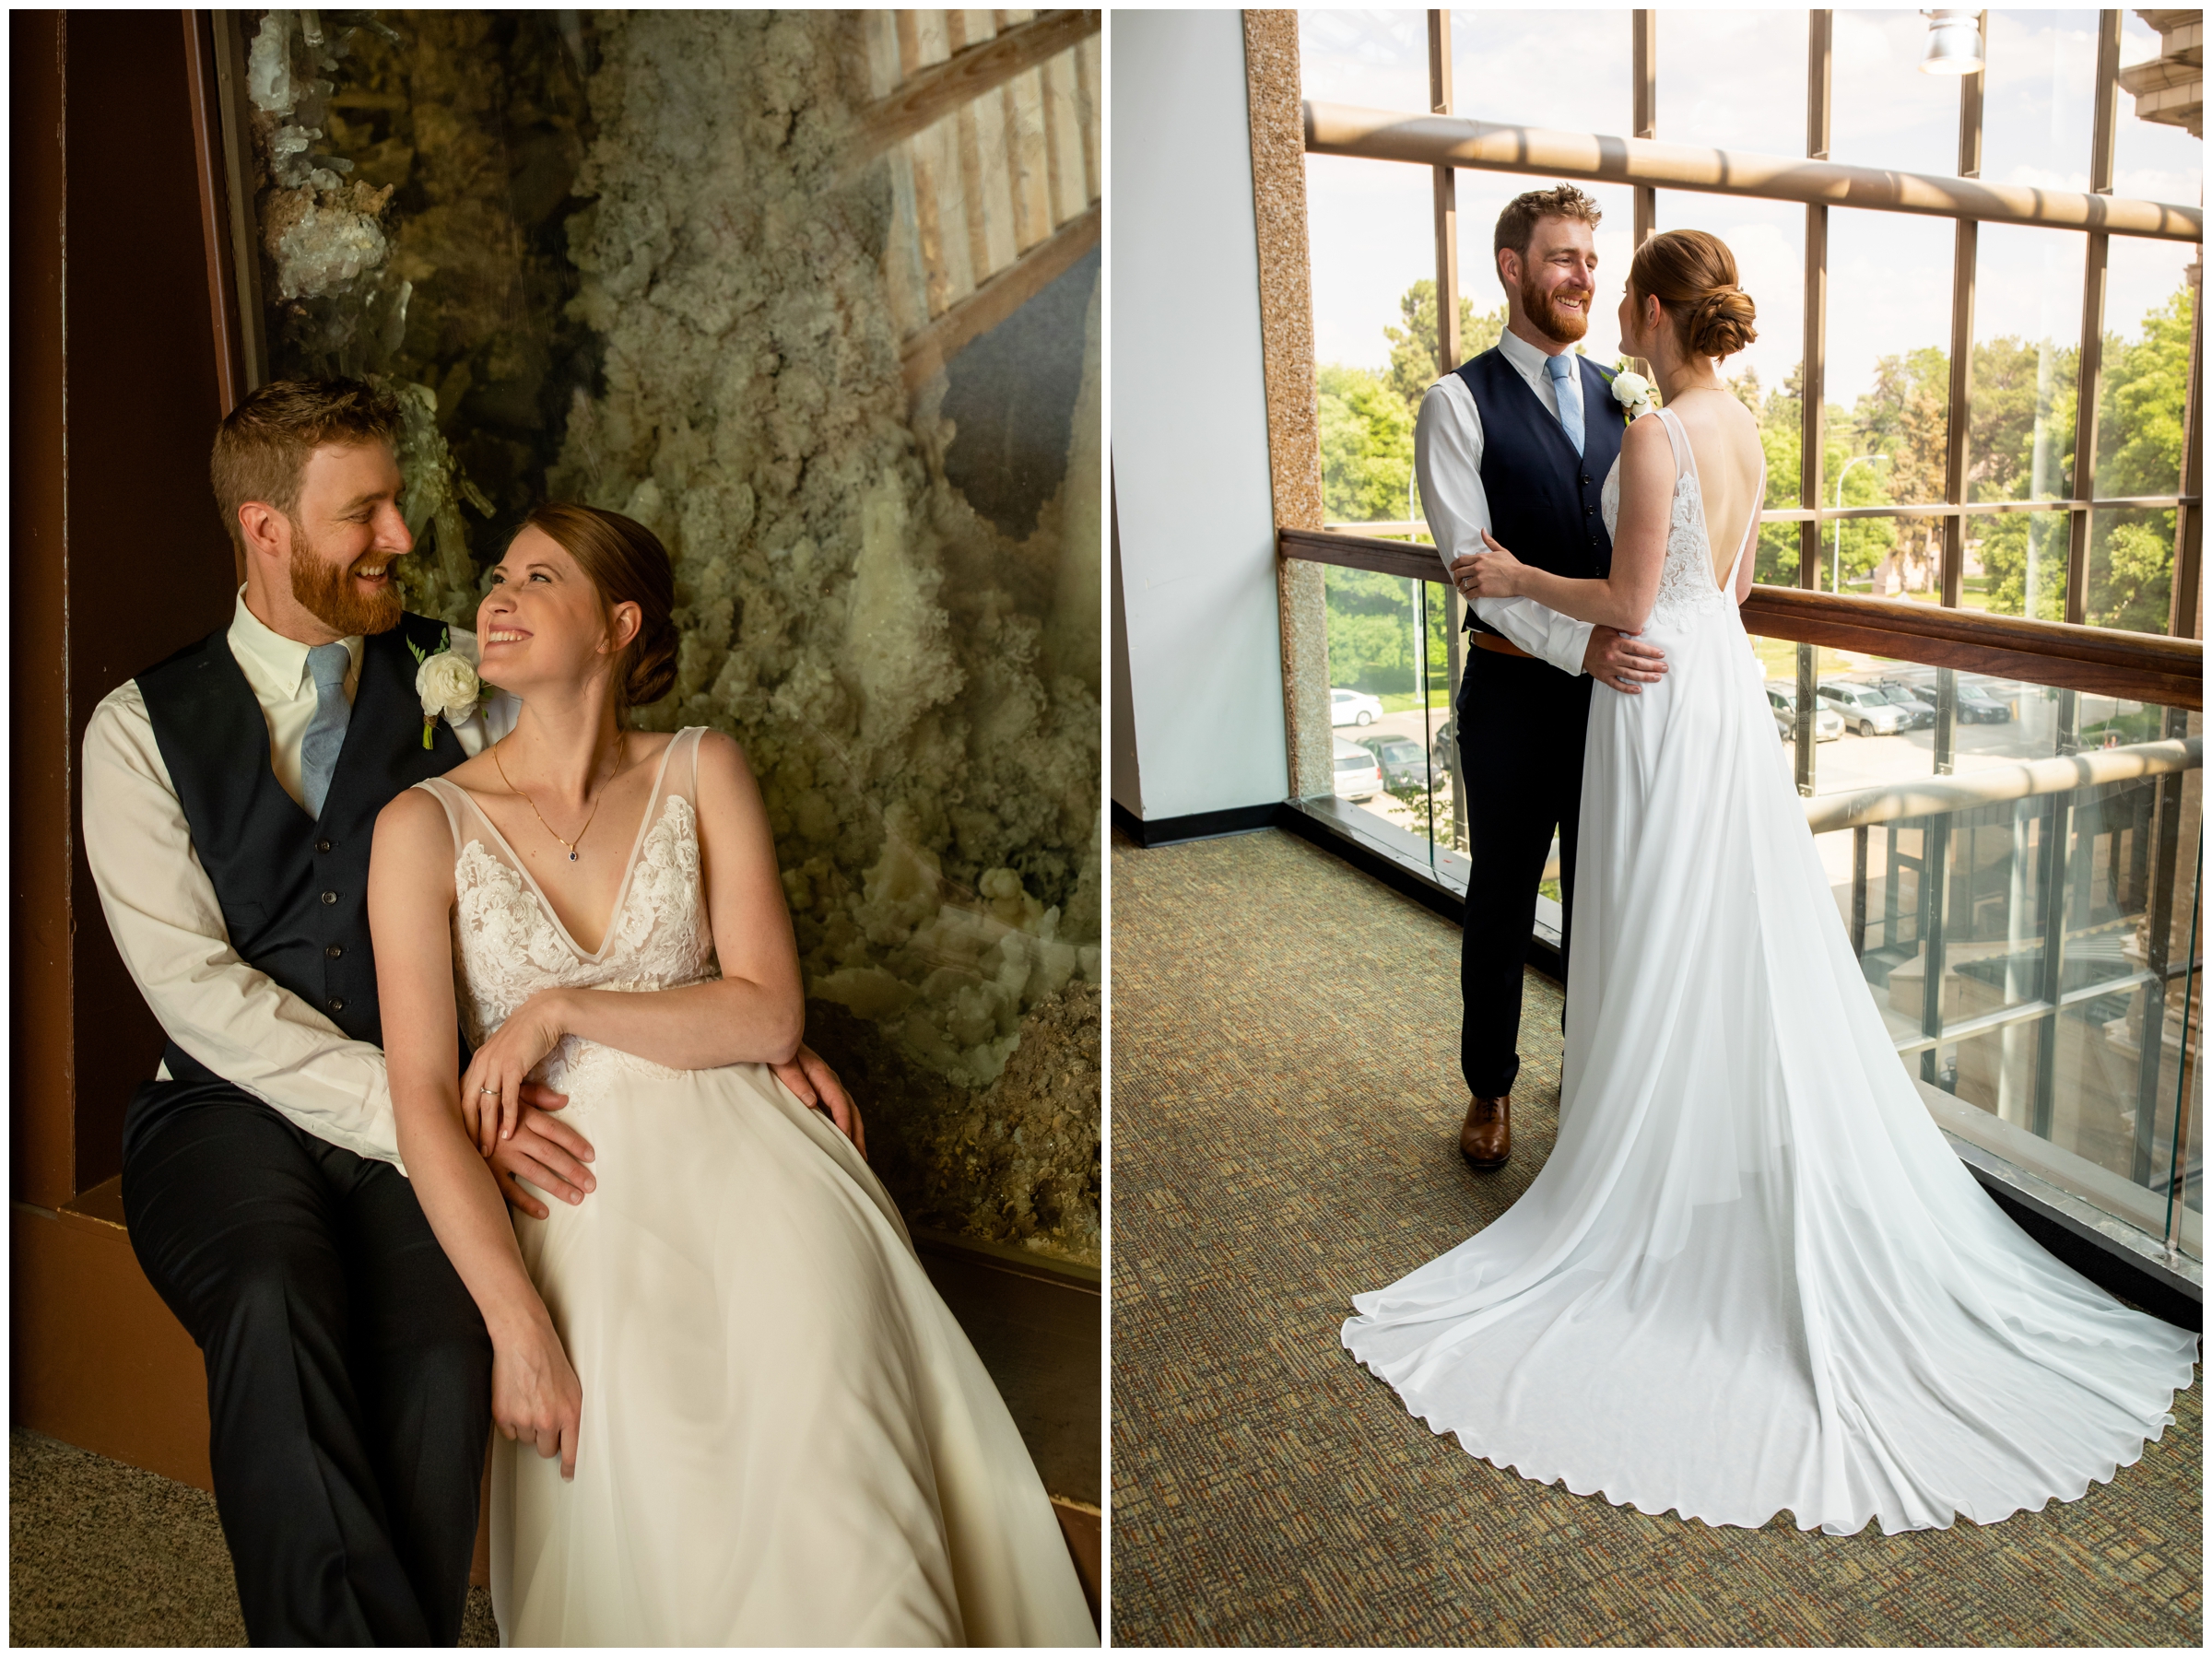 Denver Museum wedding photos at Museum of Nature and Science by Colorado photographer Plum Pretty Photography 